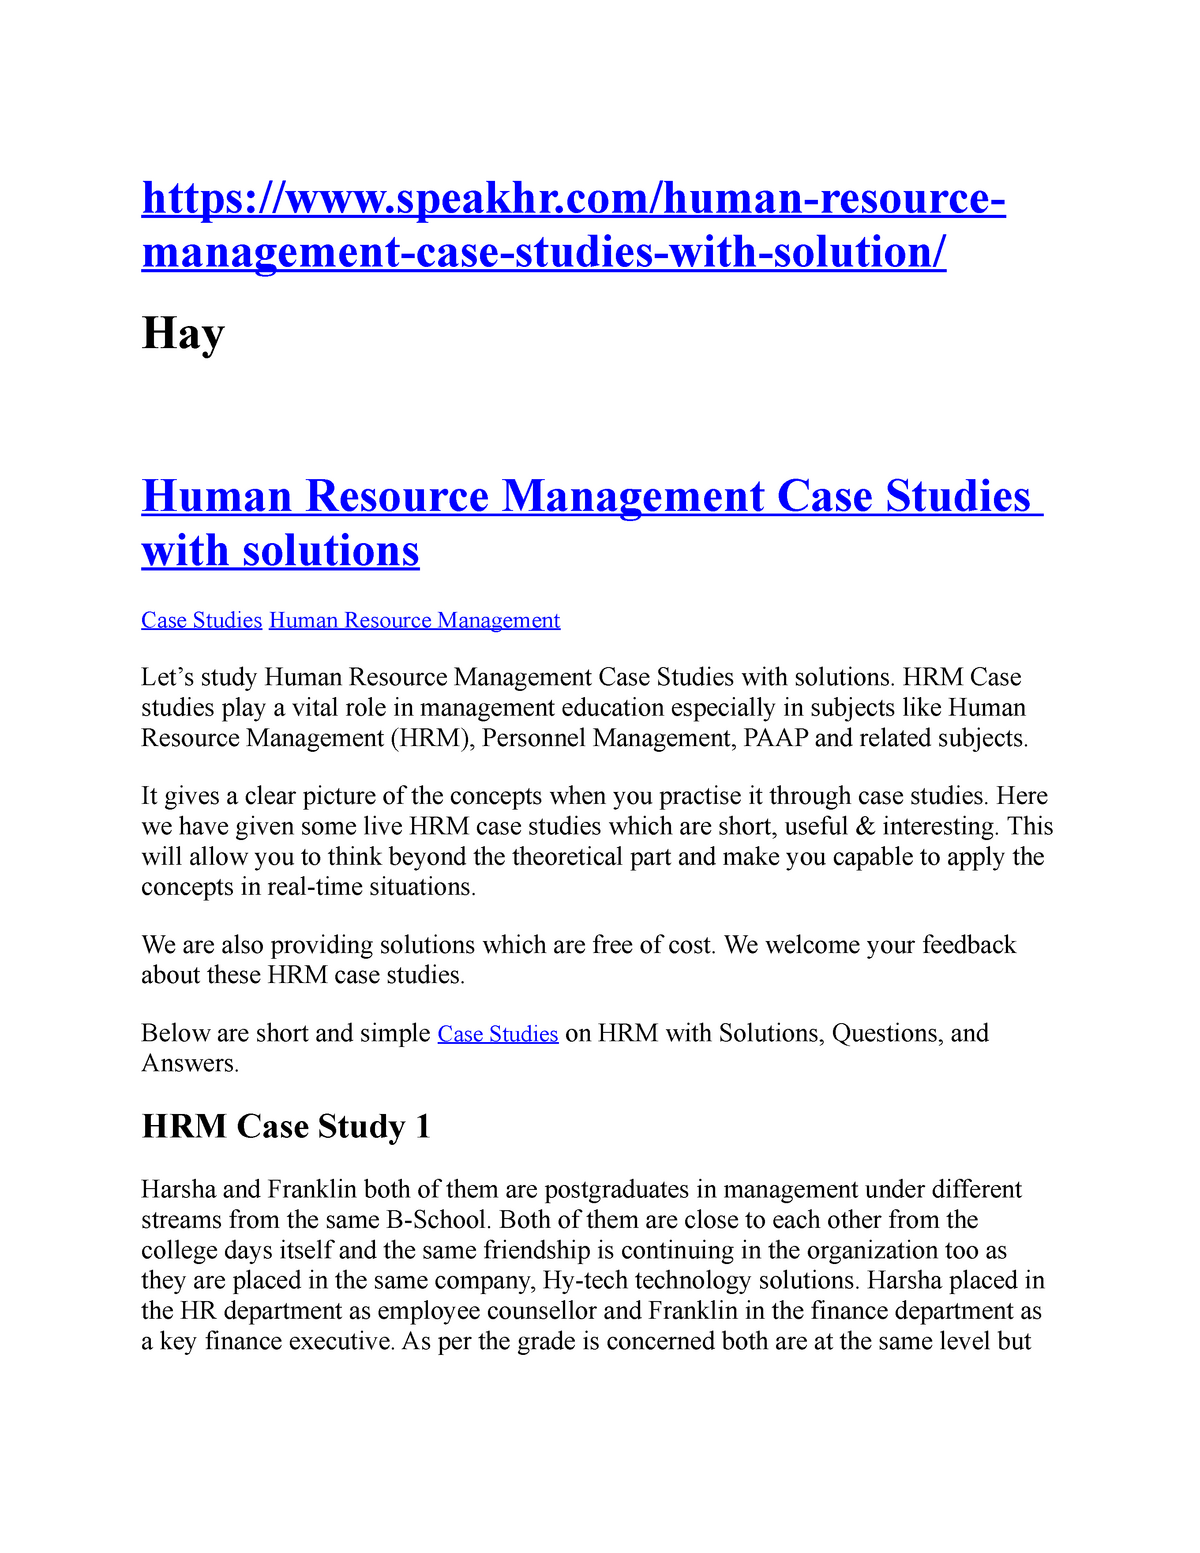 case study with solution on human resource management